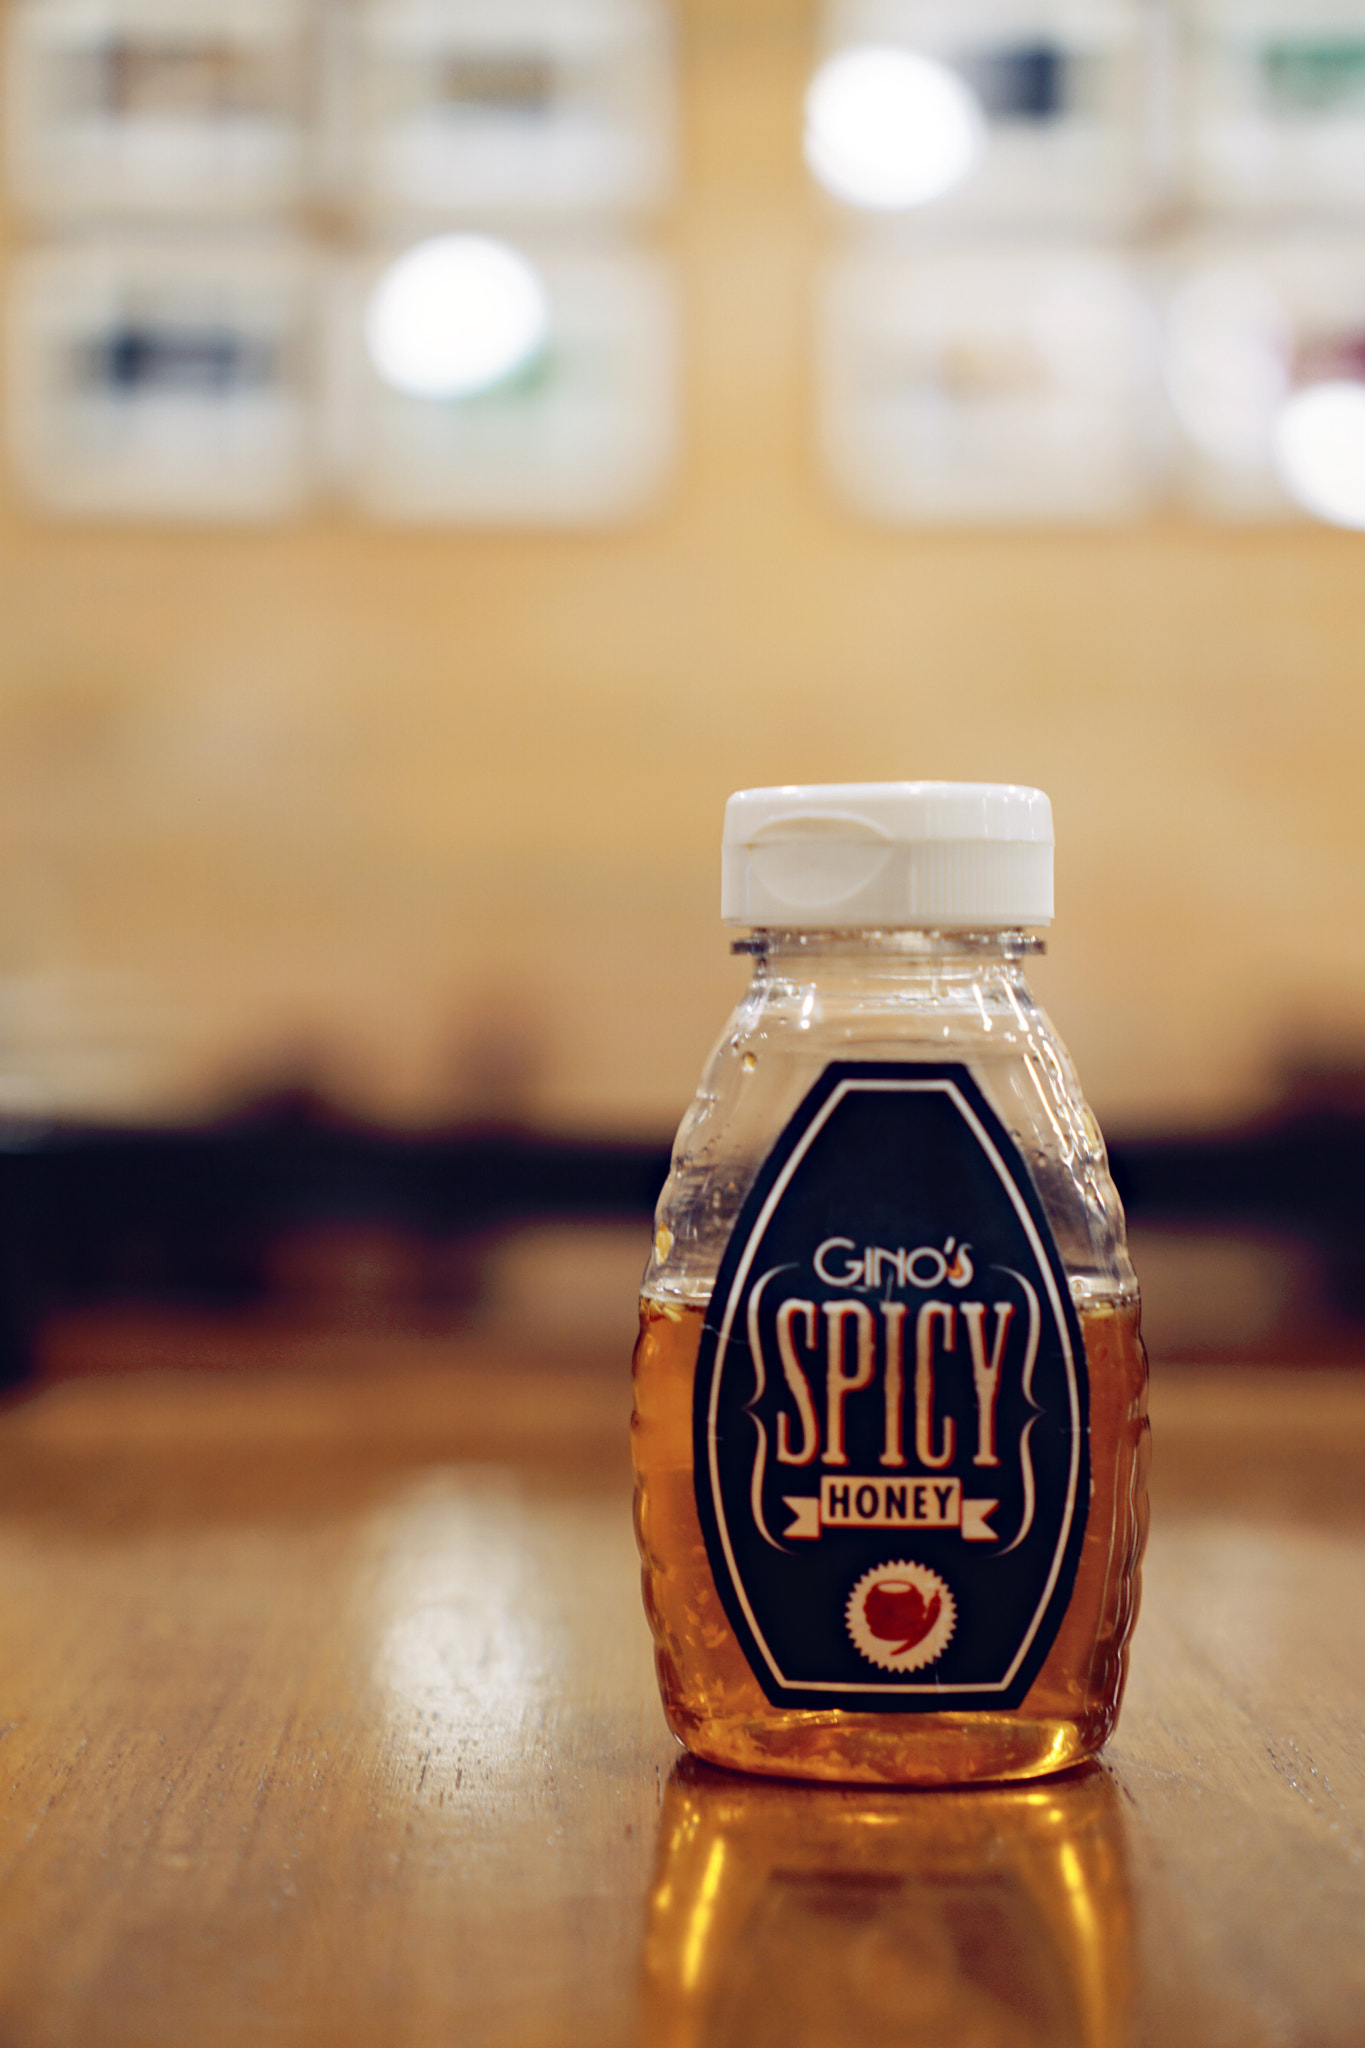 Sony a6000 sample photo. Spicy honey for my pizza photography